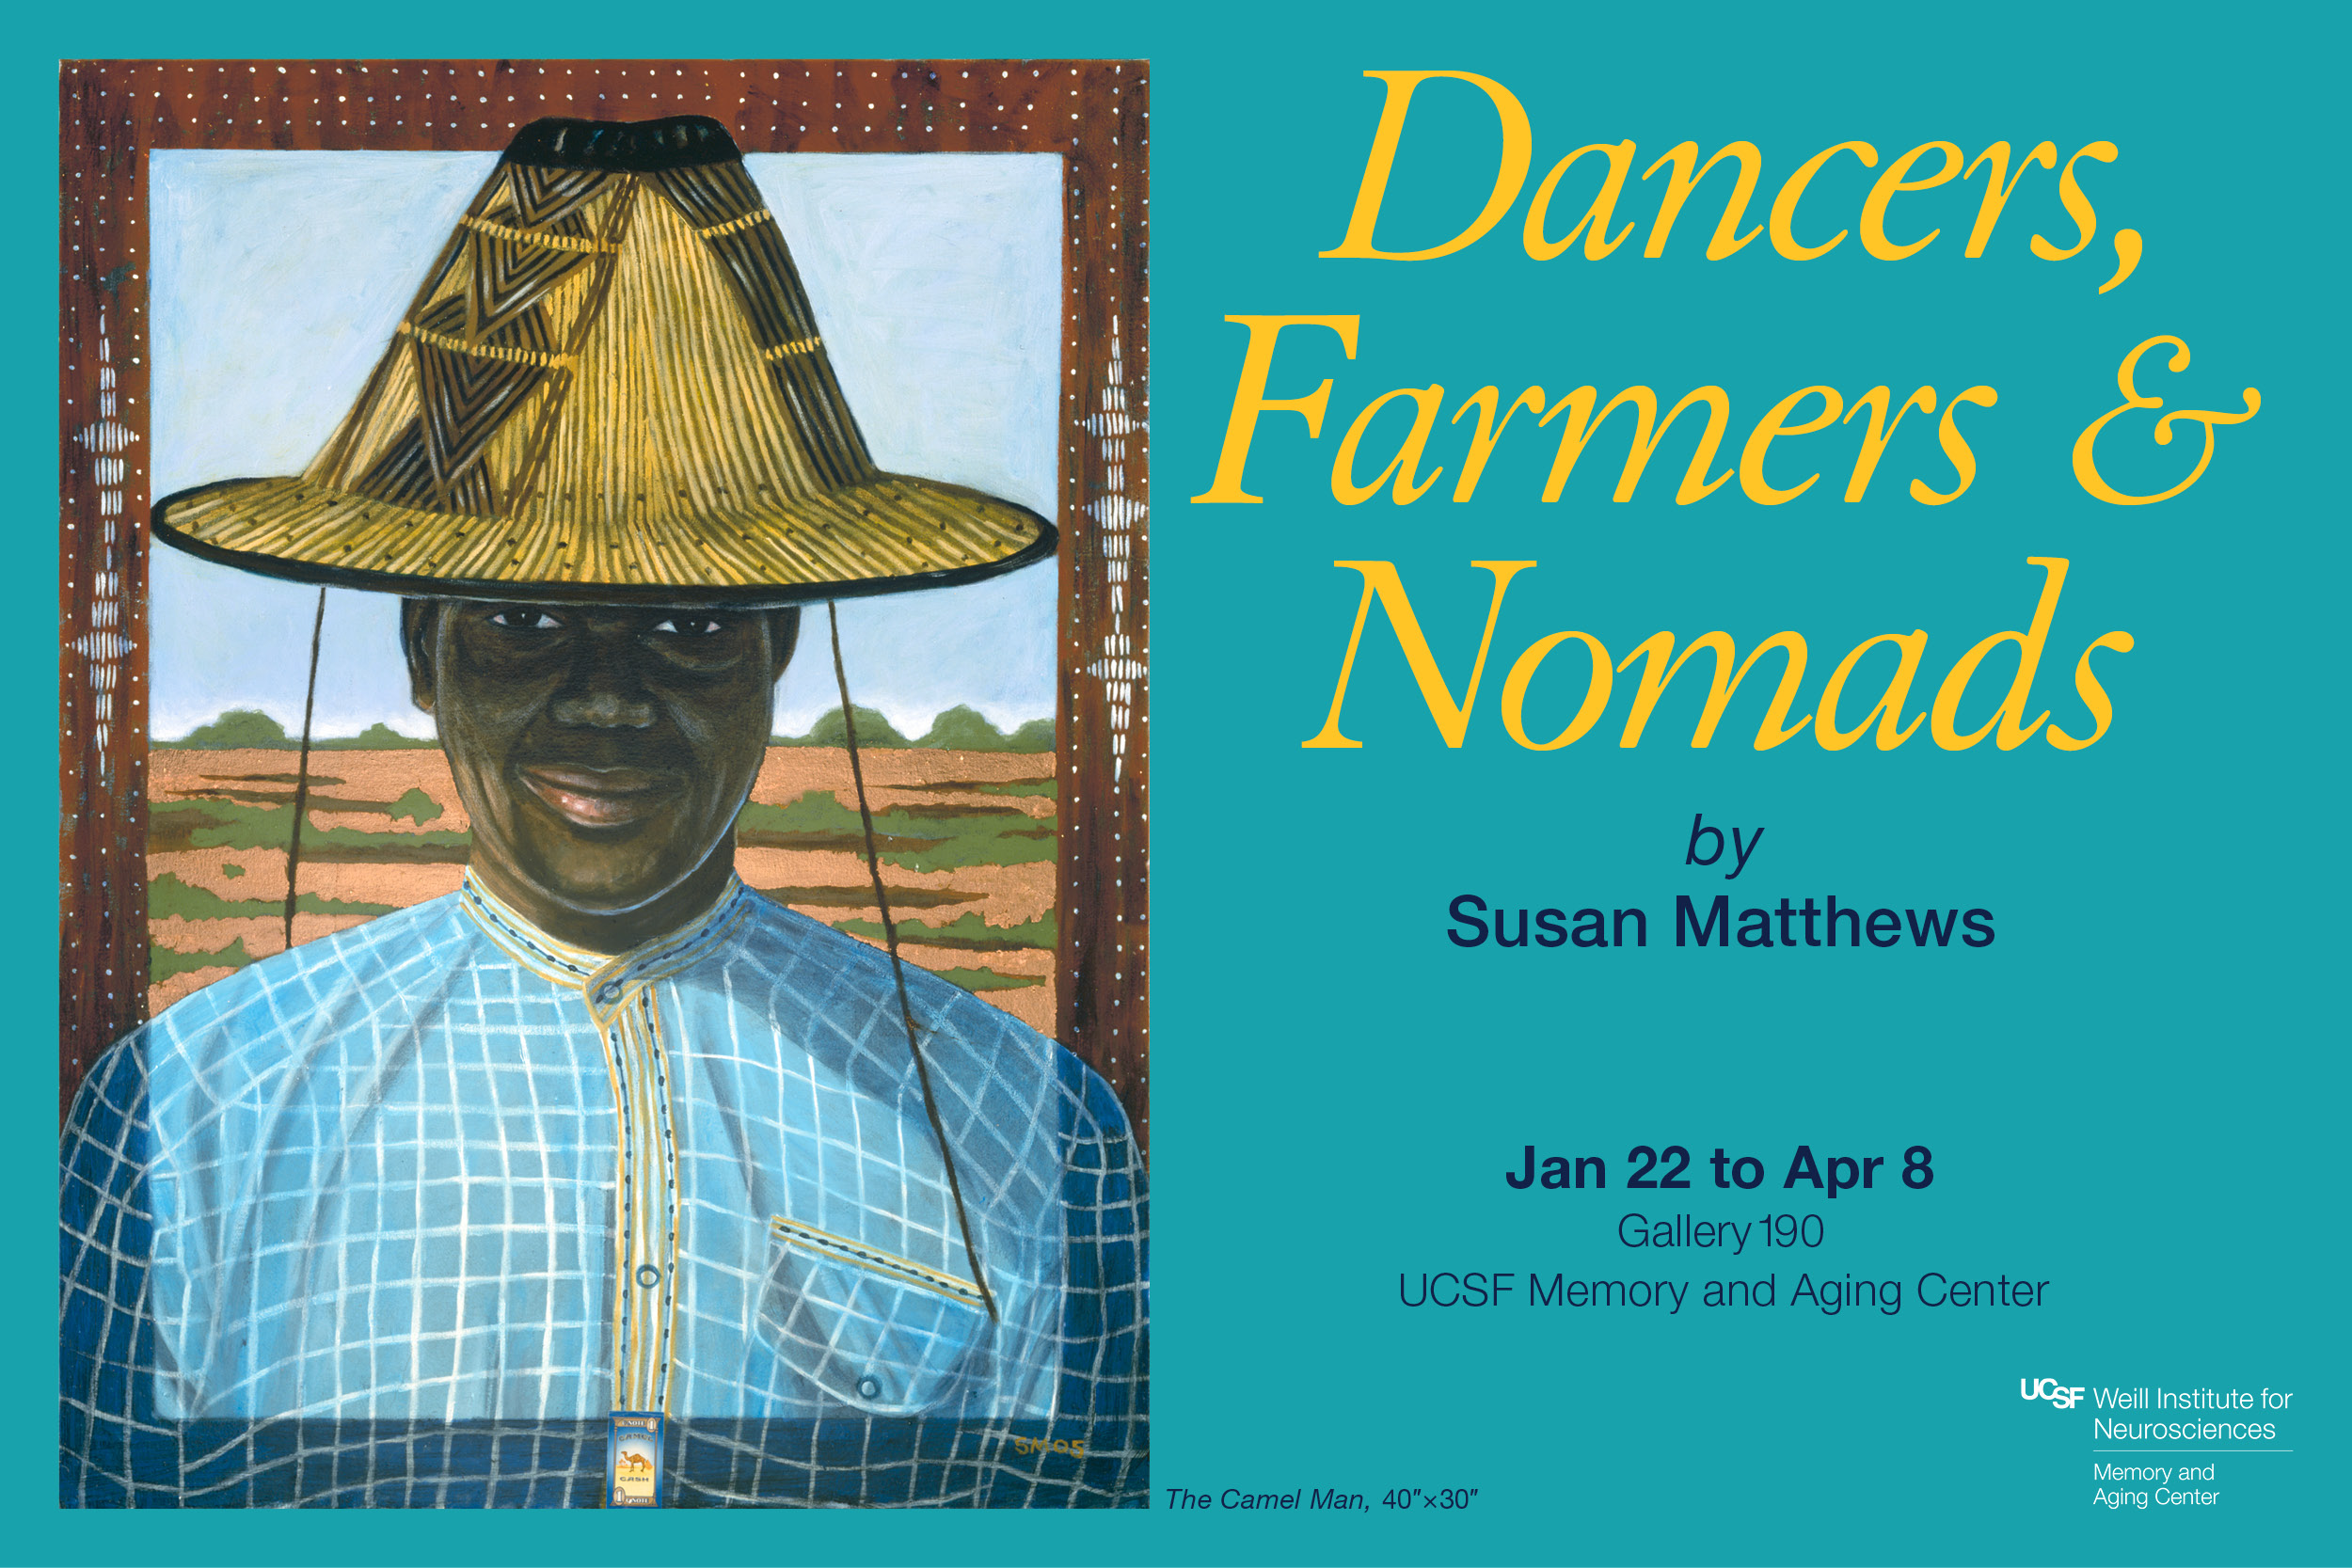 "Camel Man" painting in the Dancers, Farmers & Nomads exhibit by Susan Matthews